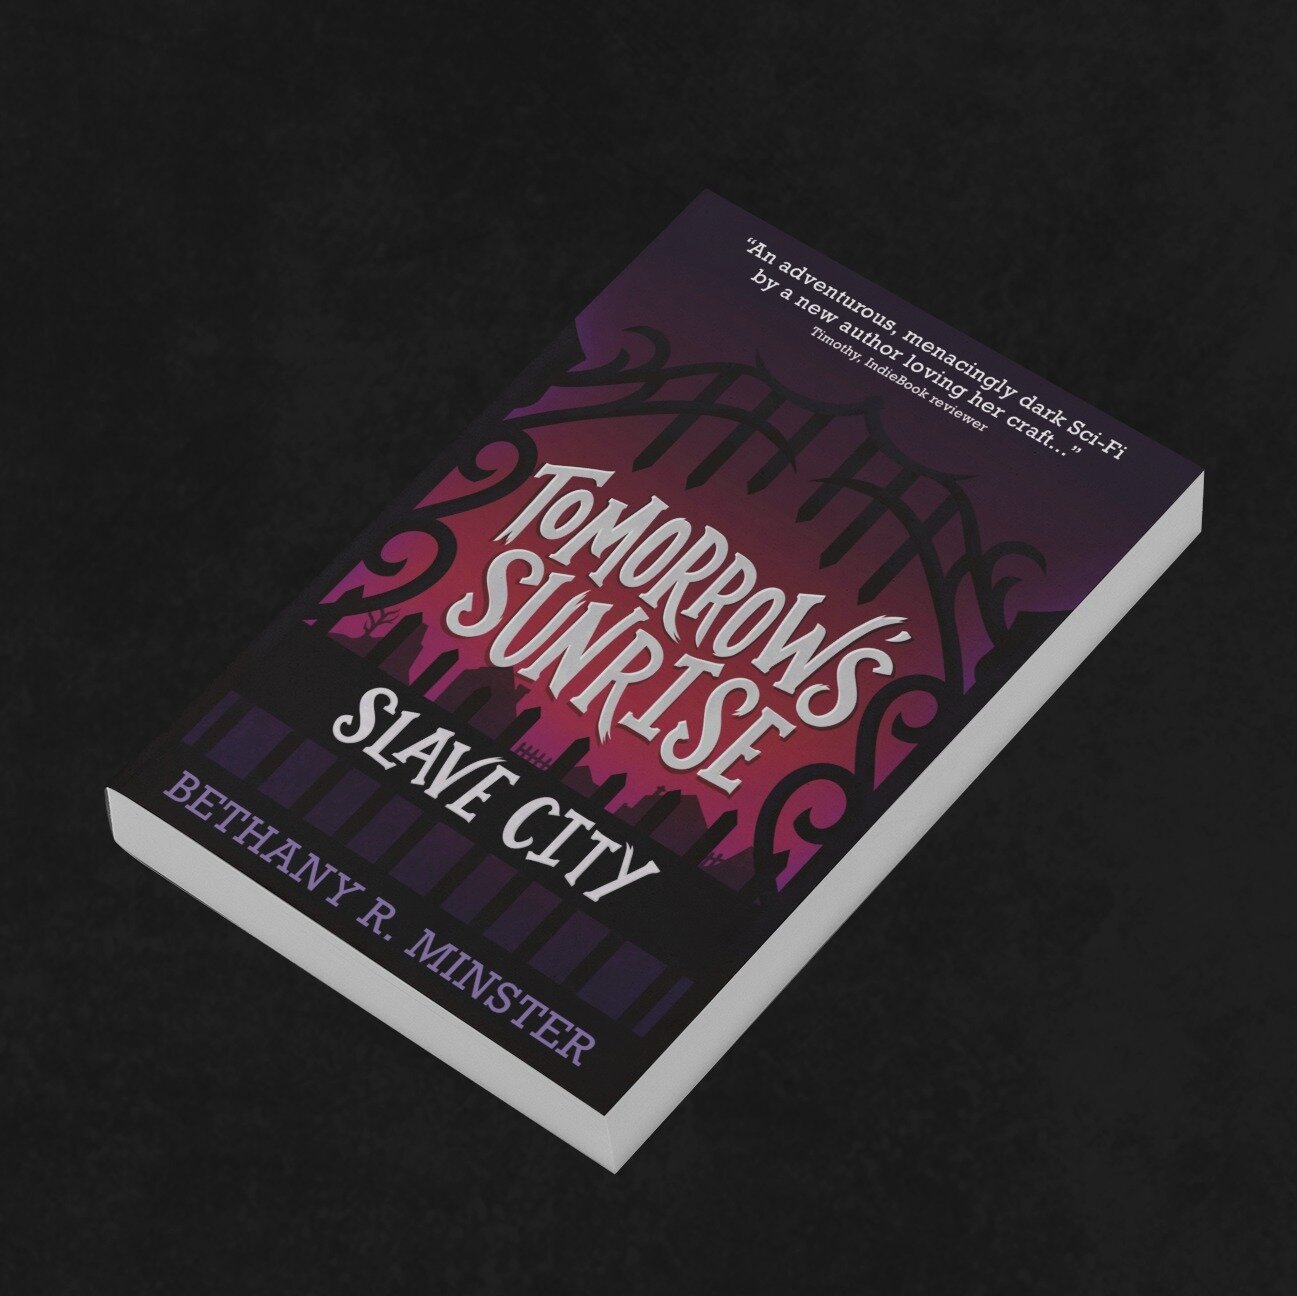 New Cover Design Alert! Tomorrow's Sunrise: Slave City by Bethany R. Minster is available for preorder on the @shawline_publishing website. Blurb below!⁠
-----------------⁠
ONE BY ONE, THE SOLDIERS VANISH&hellip;⁠
Farrah, a young slave for an imperio